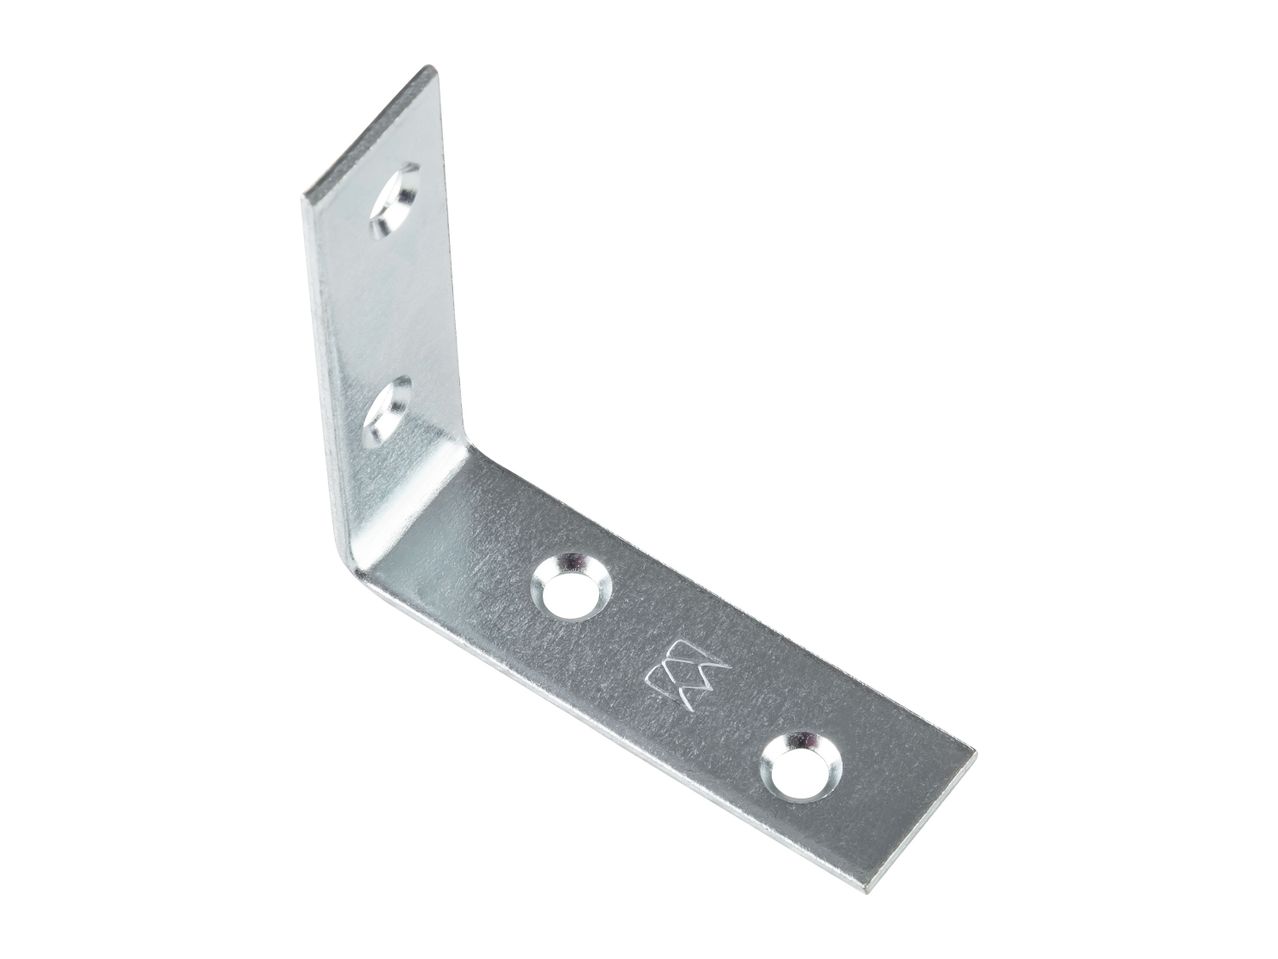 Go to full screen view: PARKSIDE Angle Brackets / Mending Plates / T-Brackets / Corner Braces - Image 2